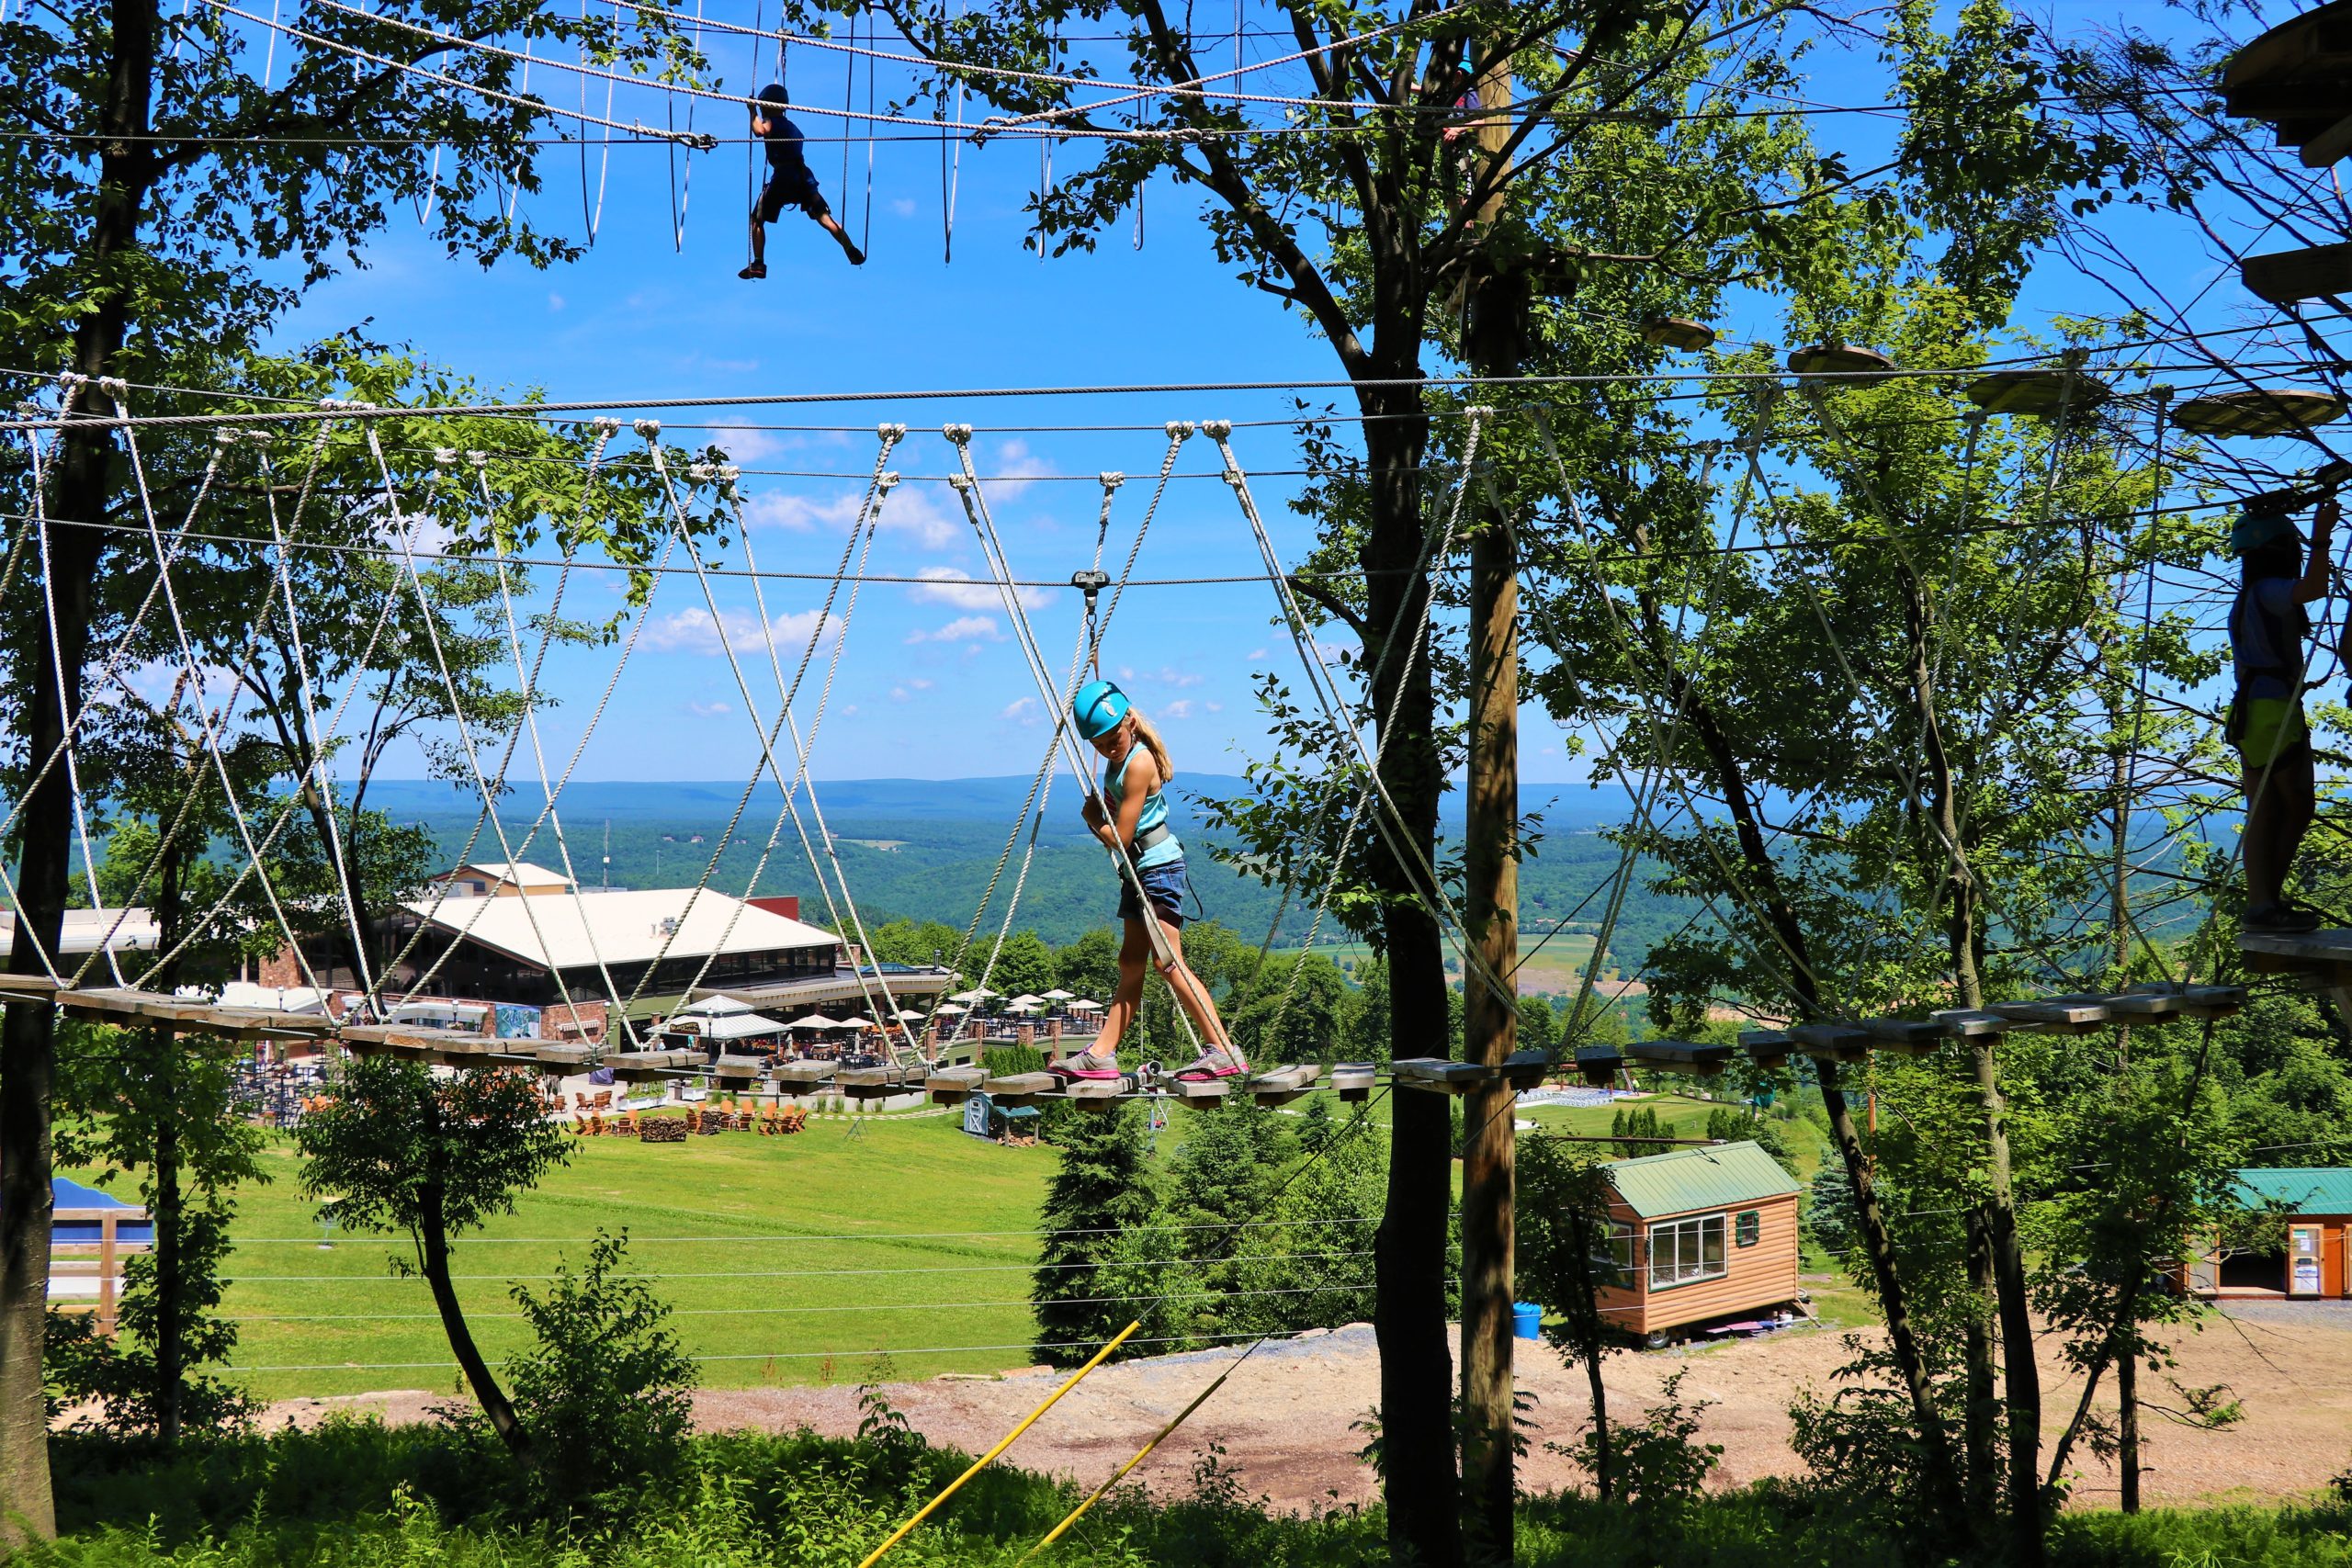 Ariel high ropes course at Blue Mountain Resort